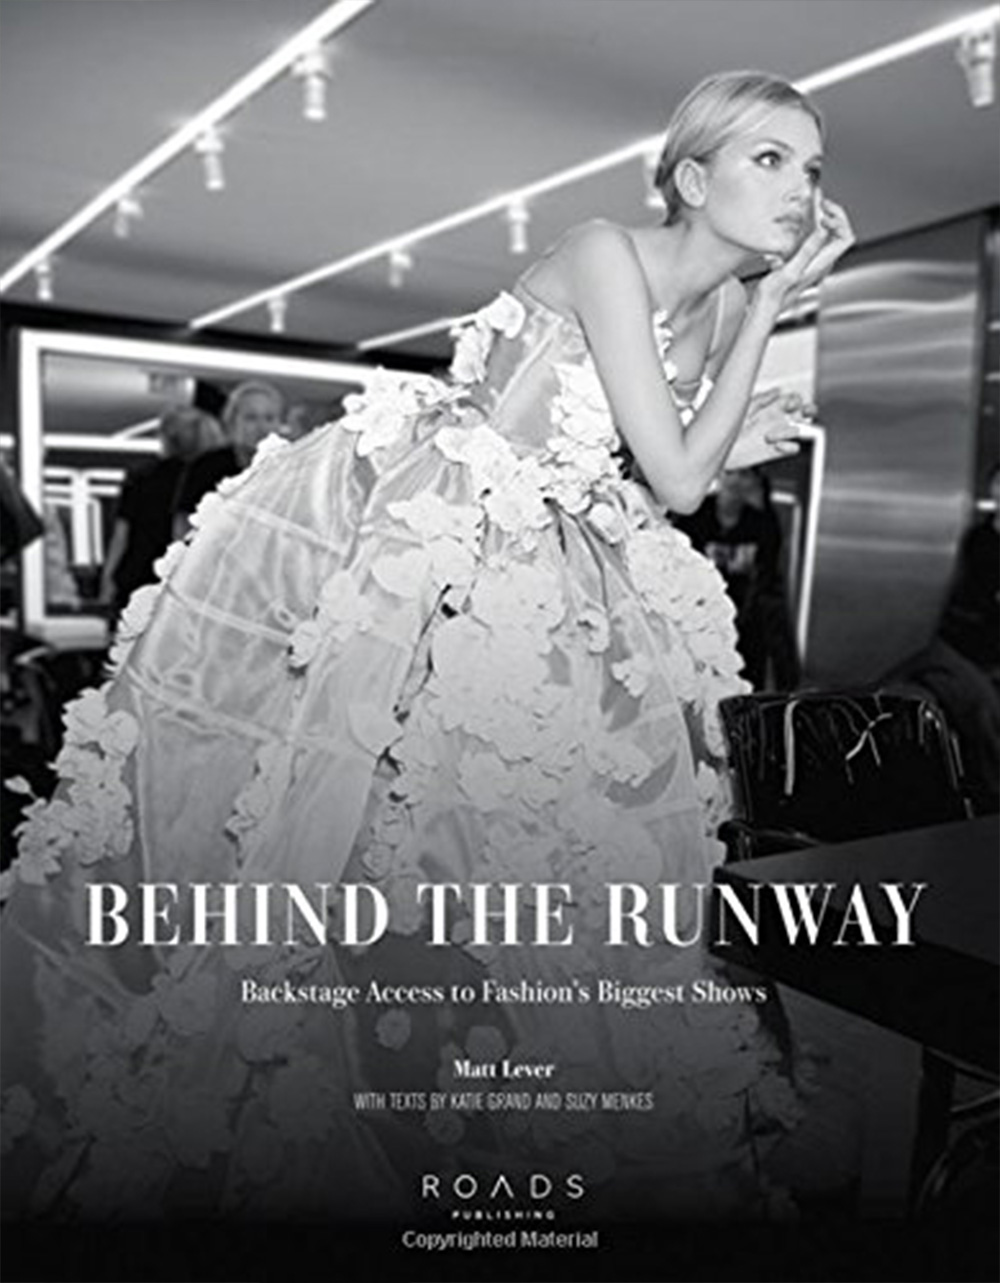 Behind the Runway: Backstage Access to Fashion’s Biggest Shows, by Matt Lever and Suzy Menkes. The ultimate backstage pass.